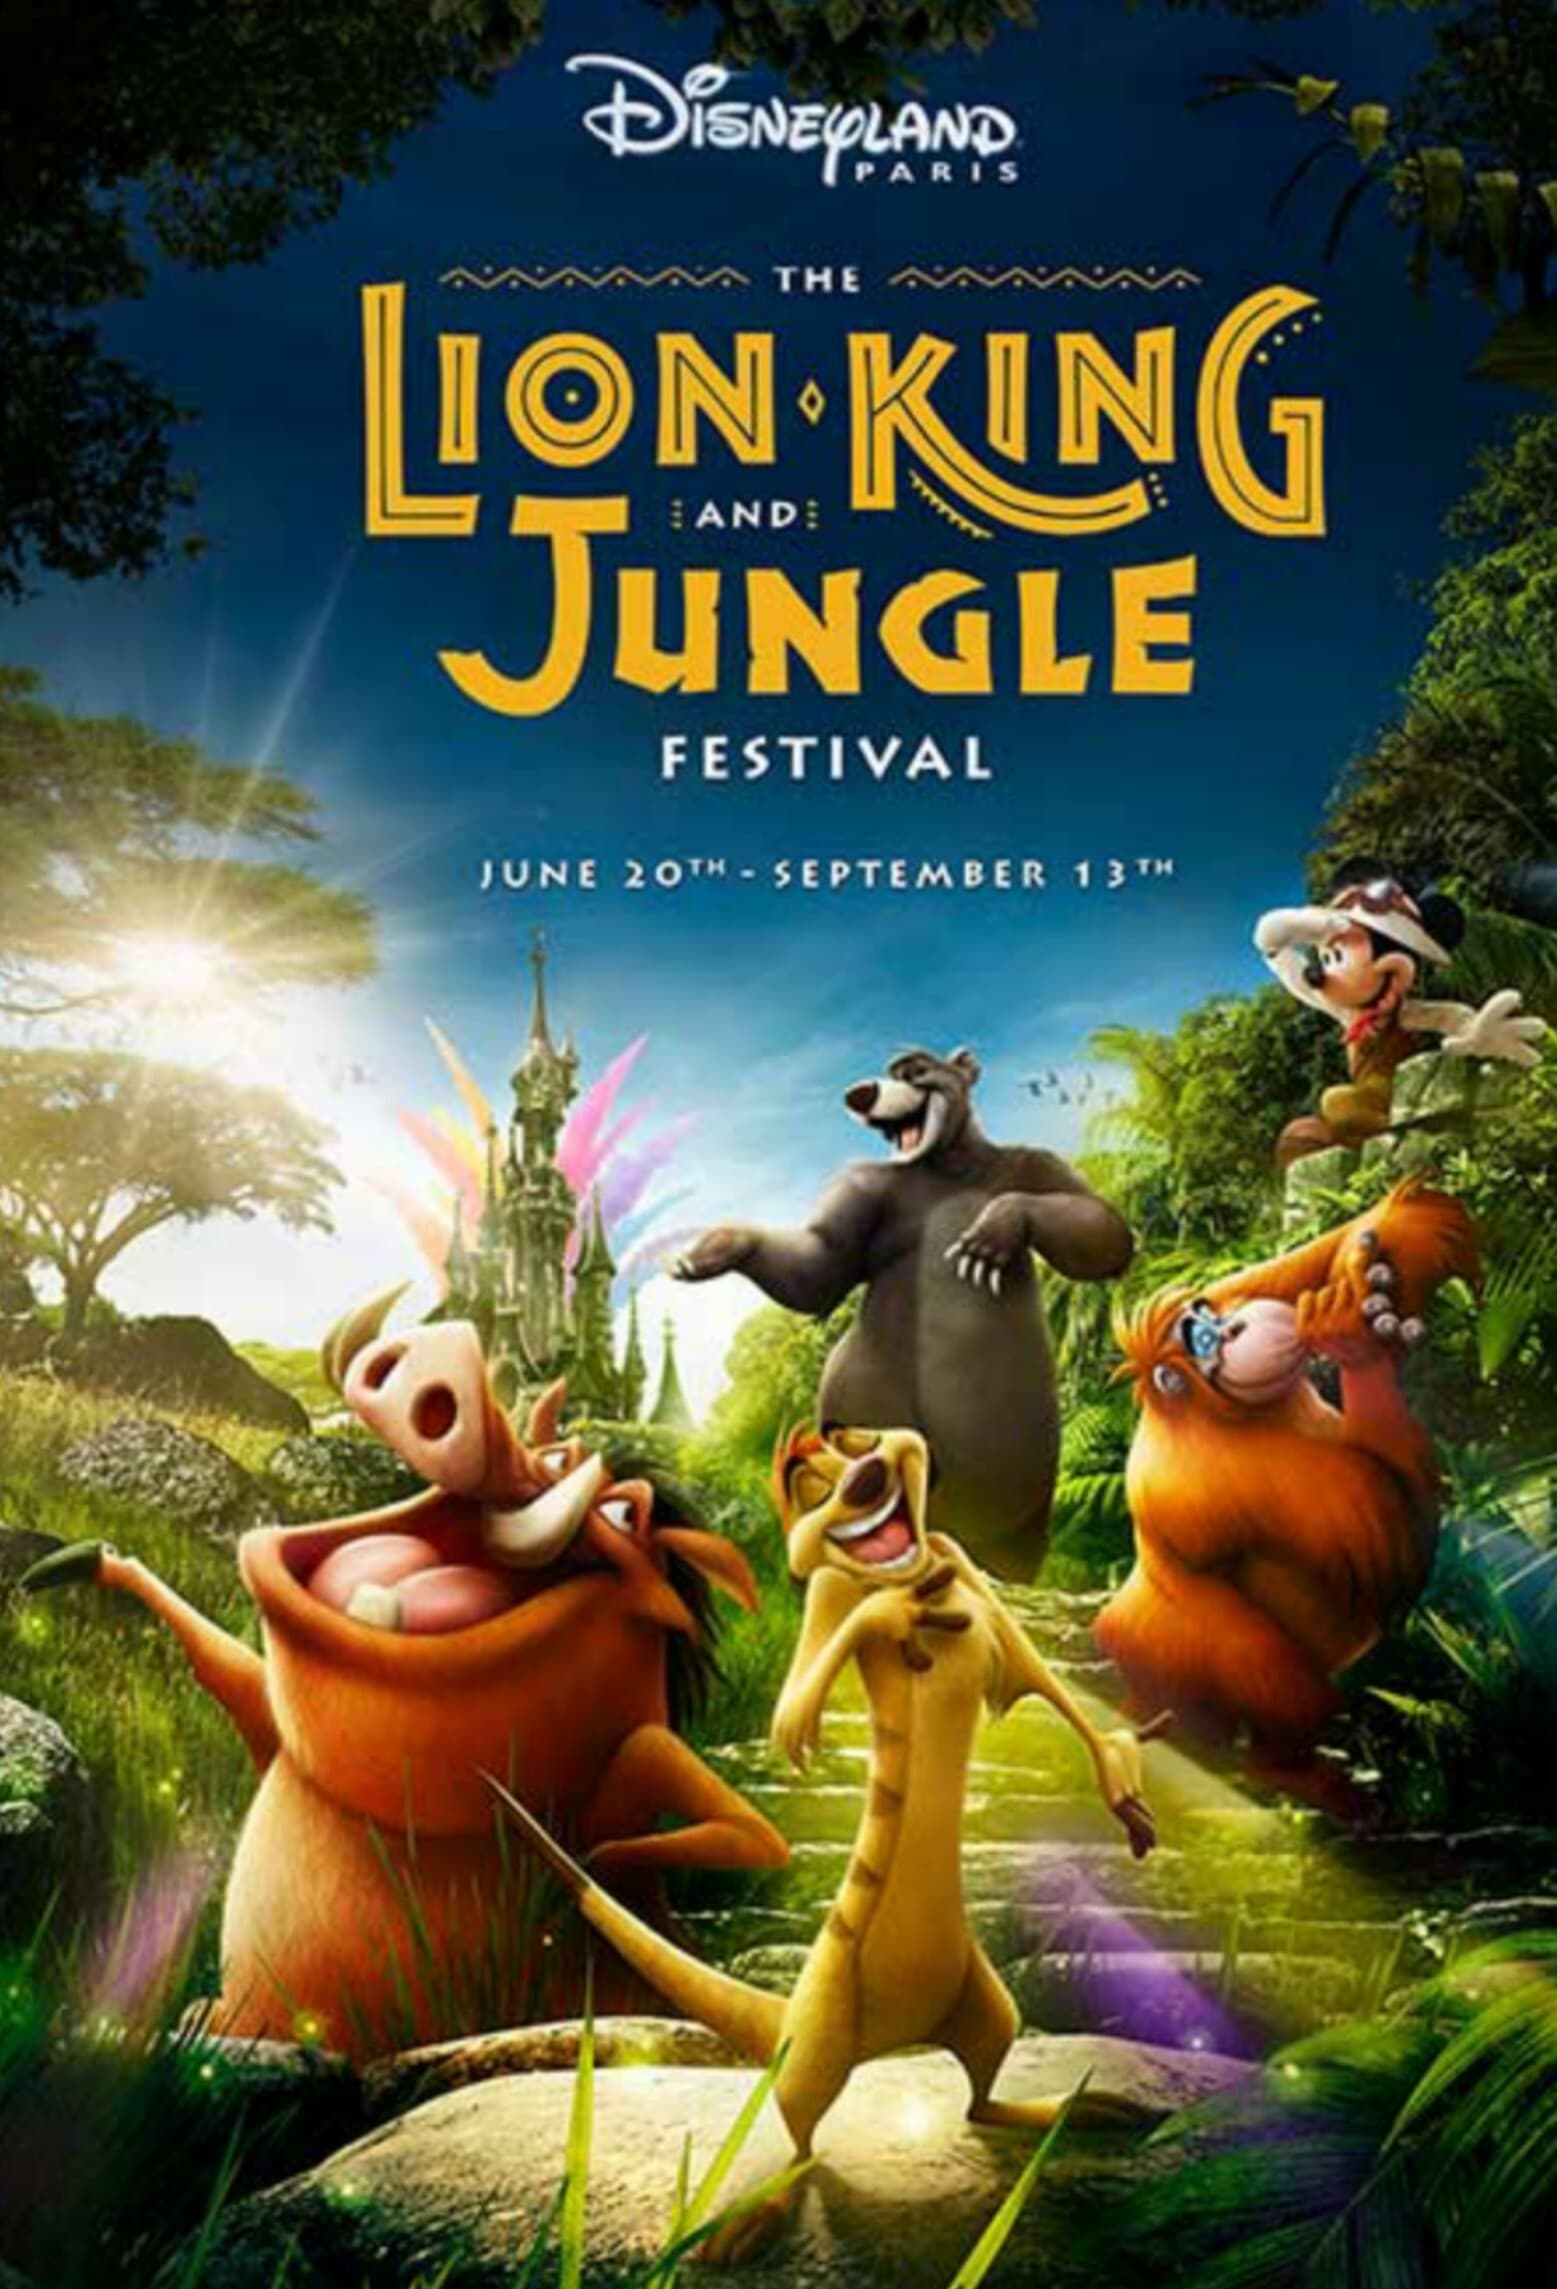 Explore the Lion King and Jungle Festival